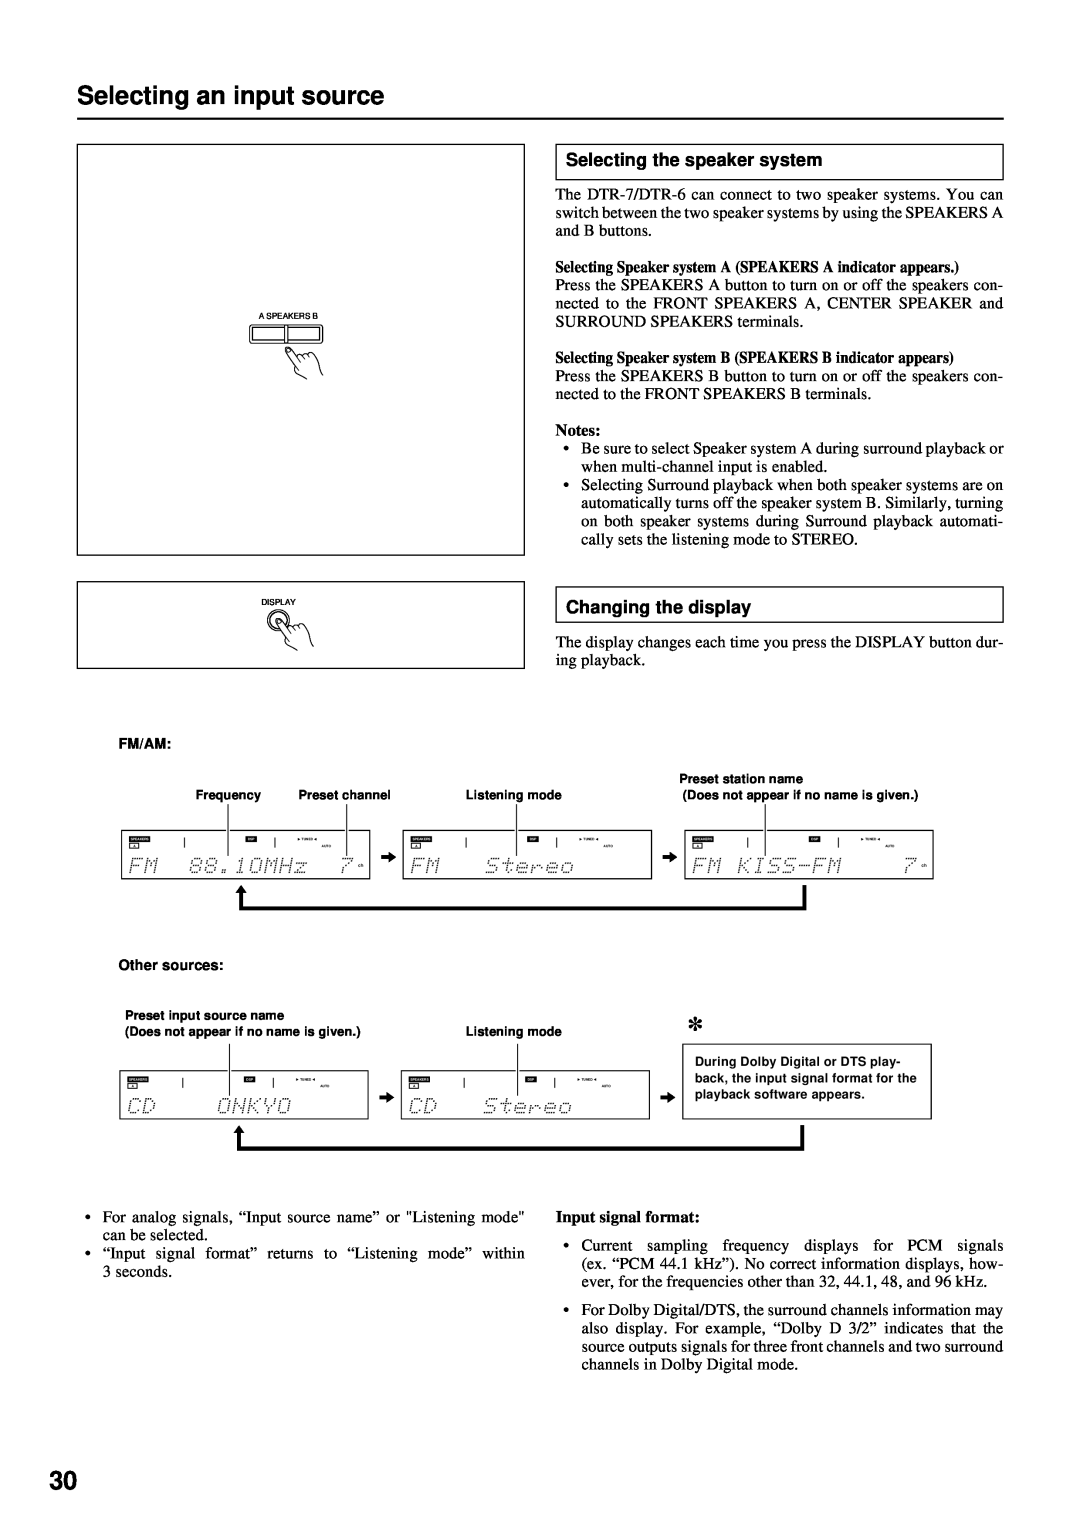 Integra DTR-7 instruction manual Selecting an input source, Selecting the speaker system, Changing the display 